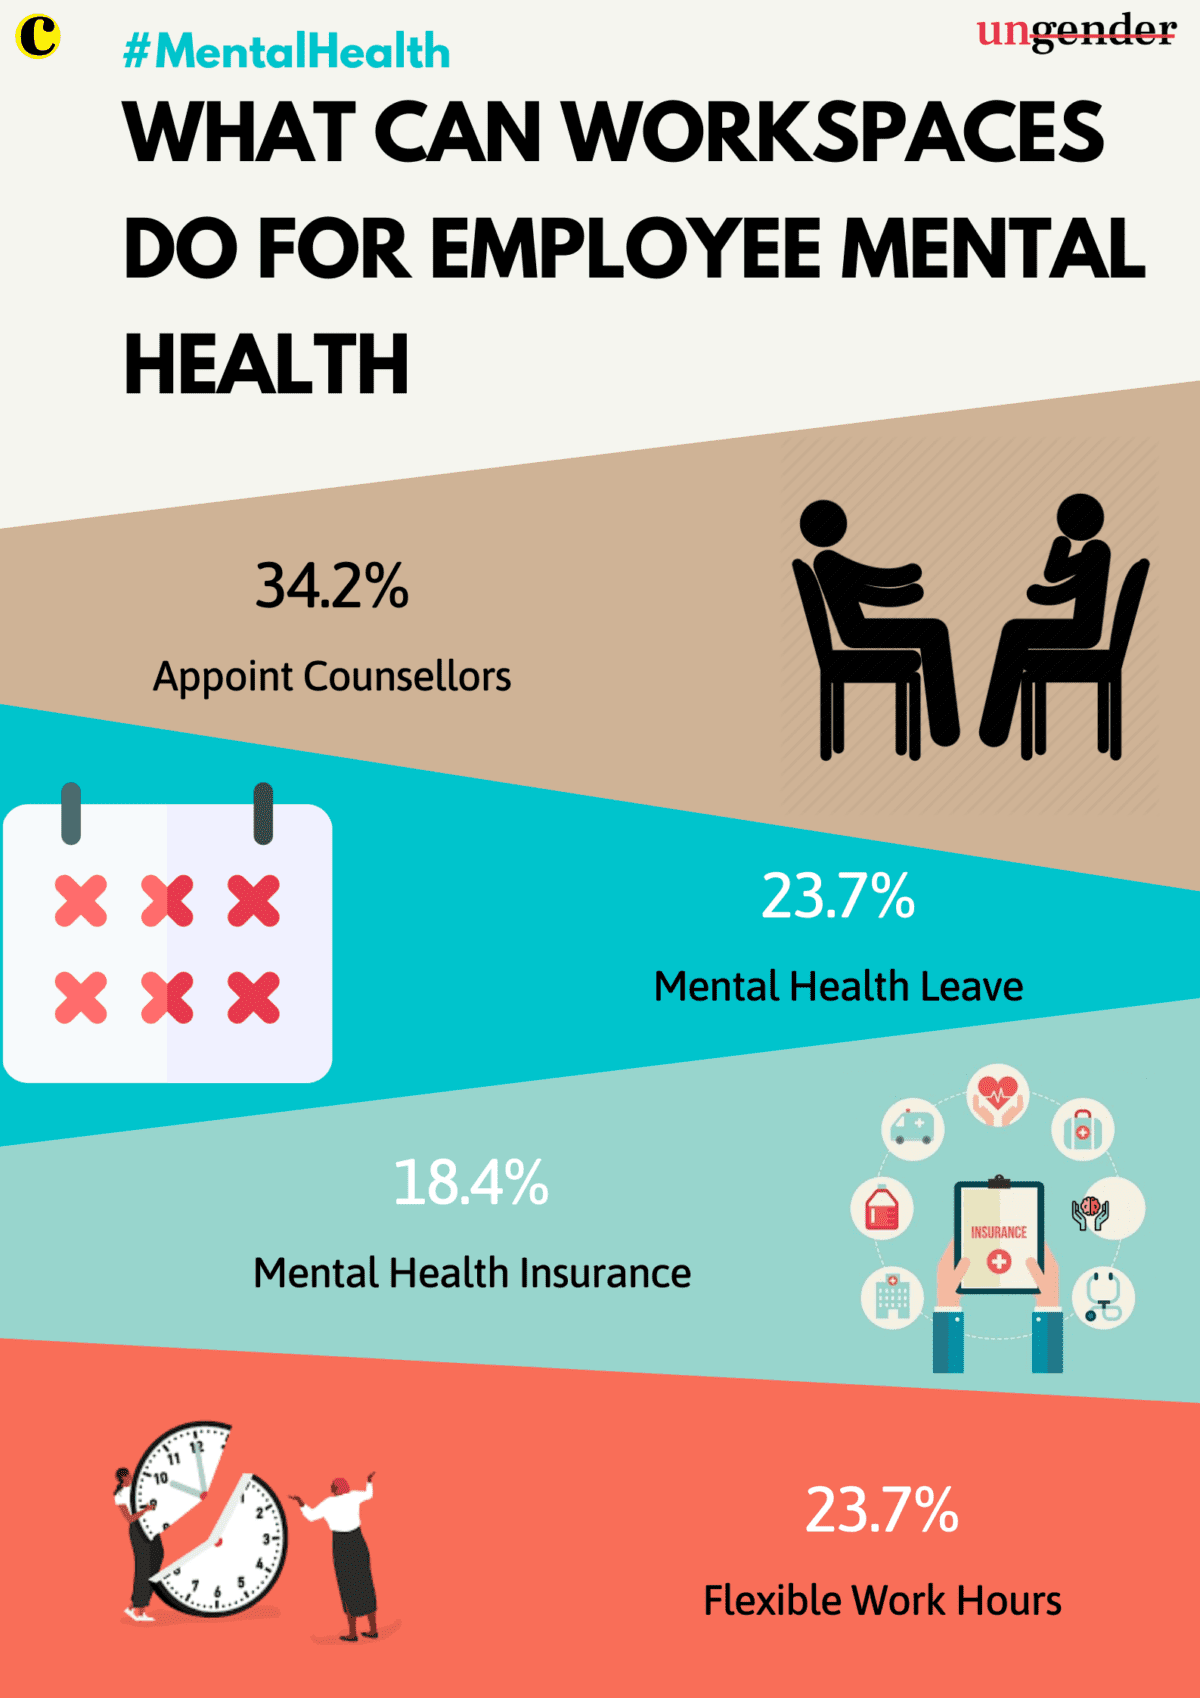 What Can Workplaces Do For Employee Mental Health?